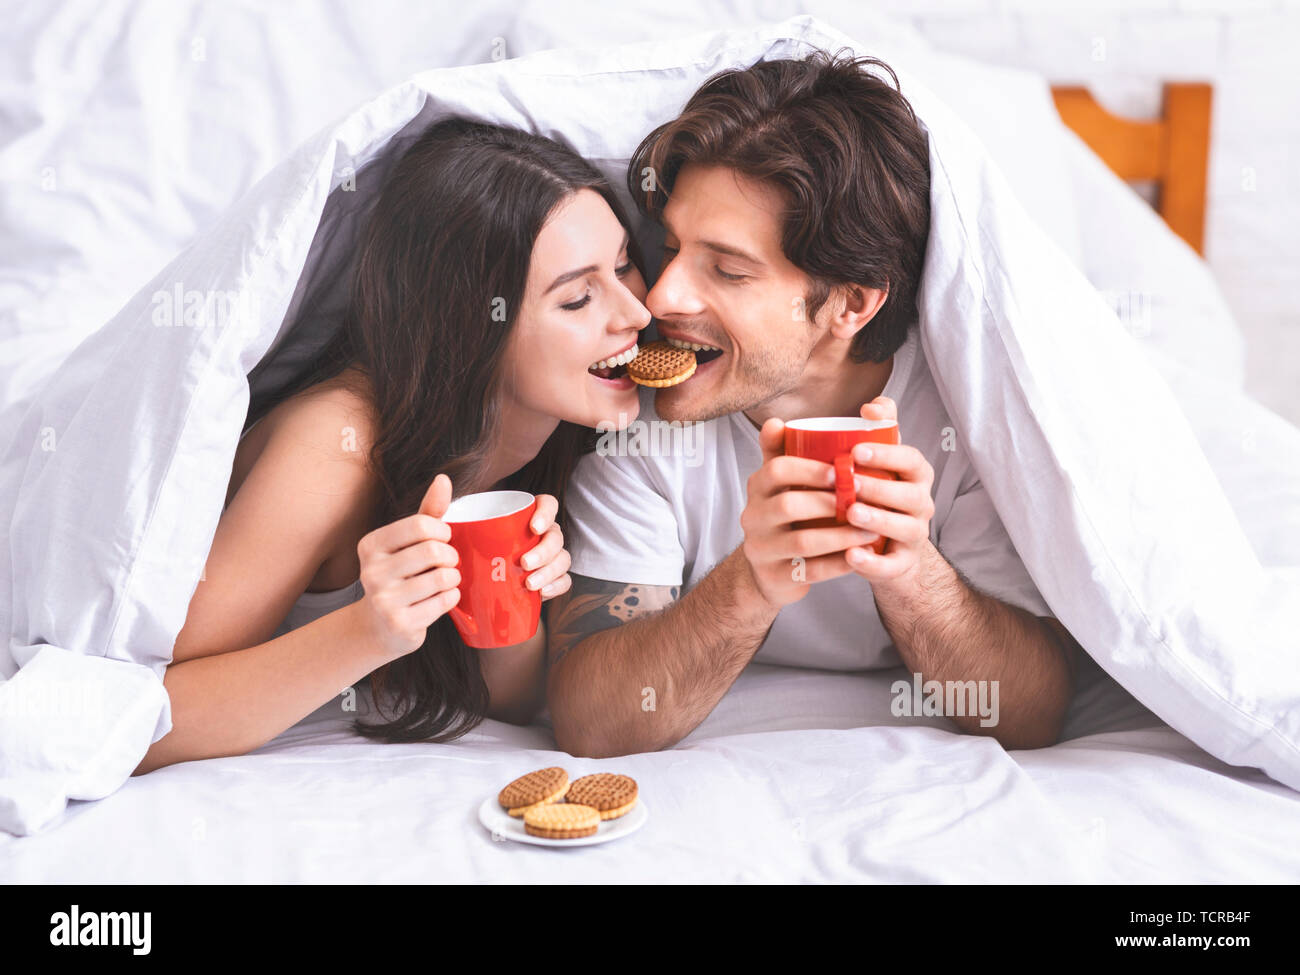 Cute millennial couple in love sharing breakfast in bed Stock Photo